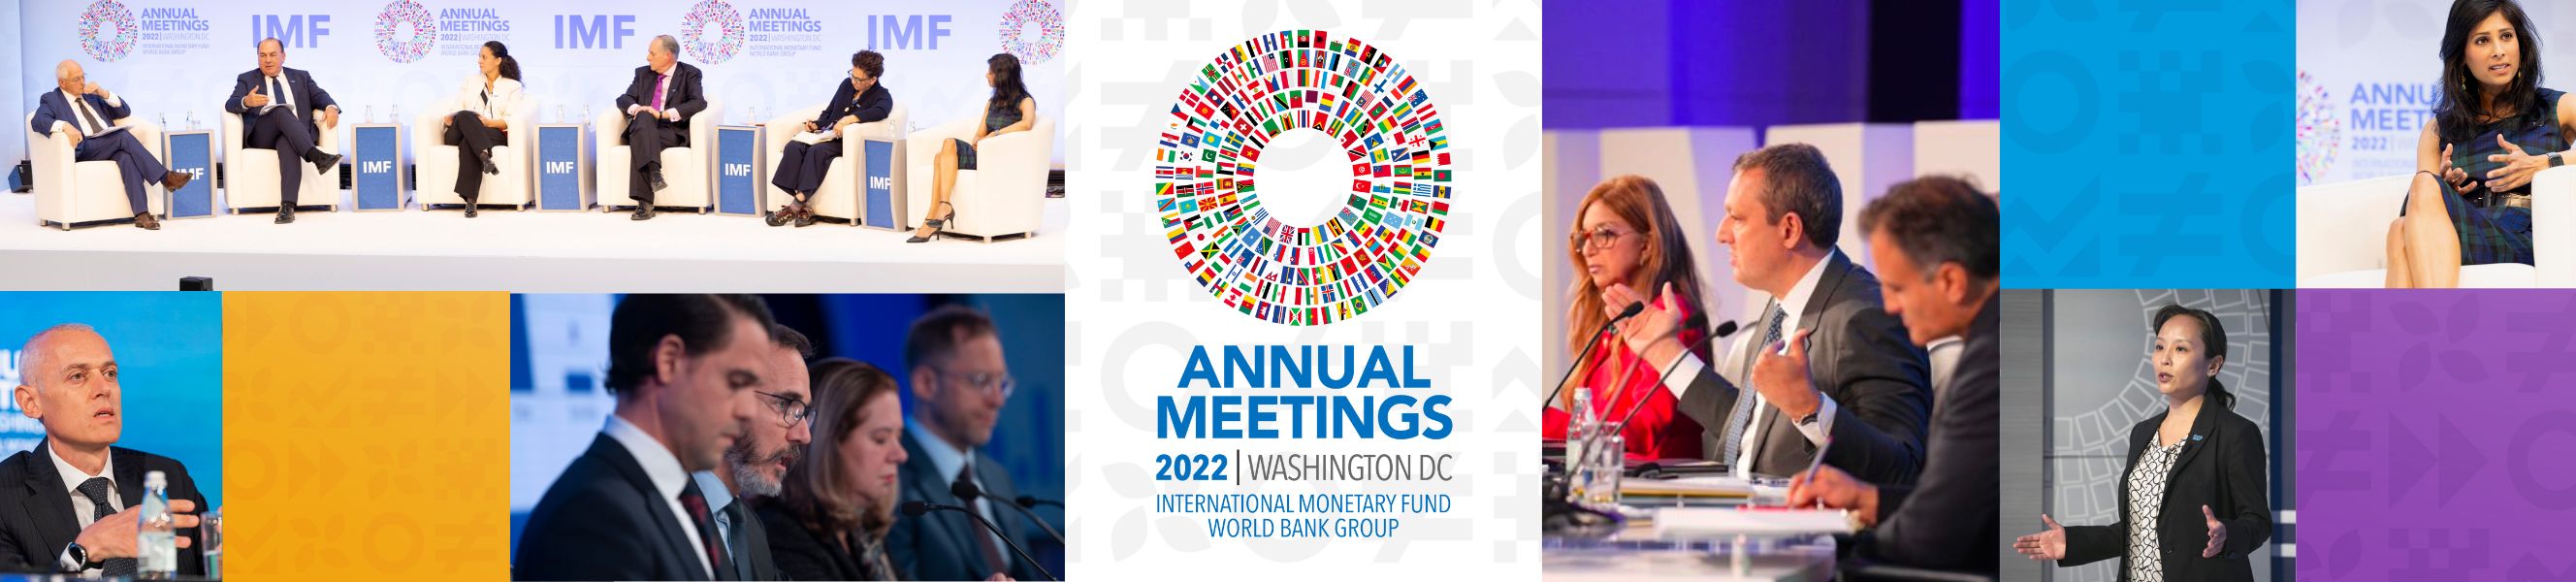 IMF Annual Meetings Day 2